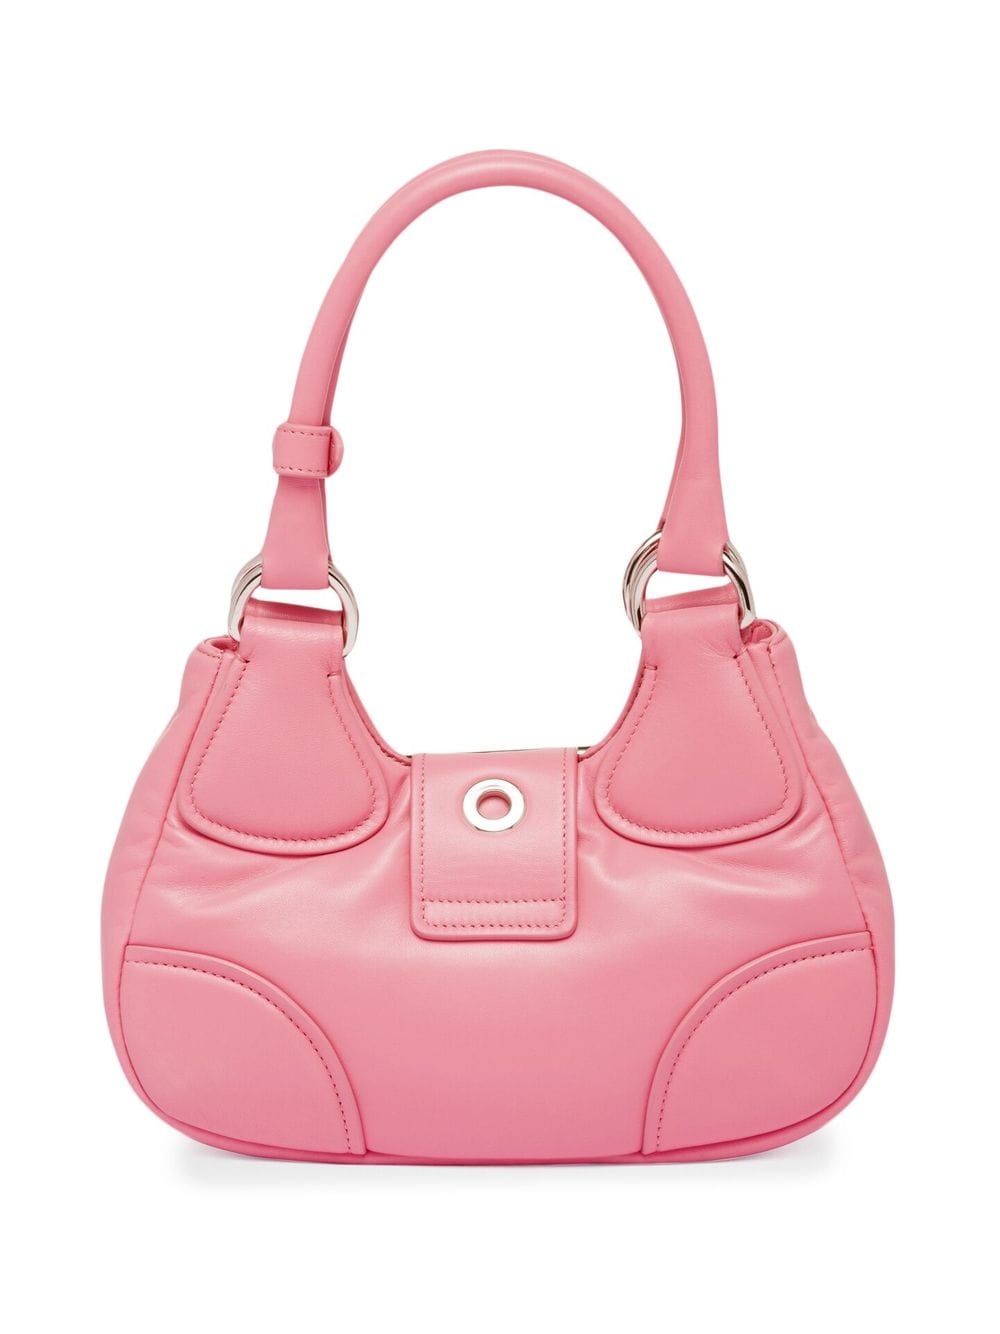 pricing help!!! early 2000s pink monogram coach shoulder bag/purse